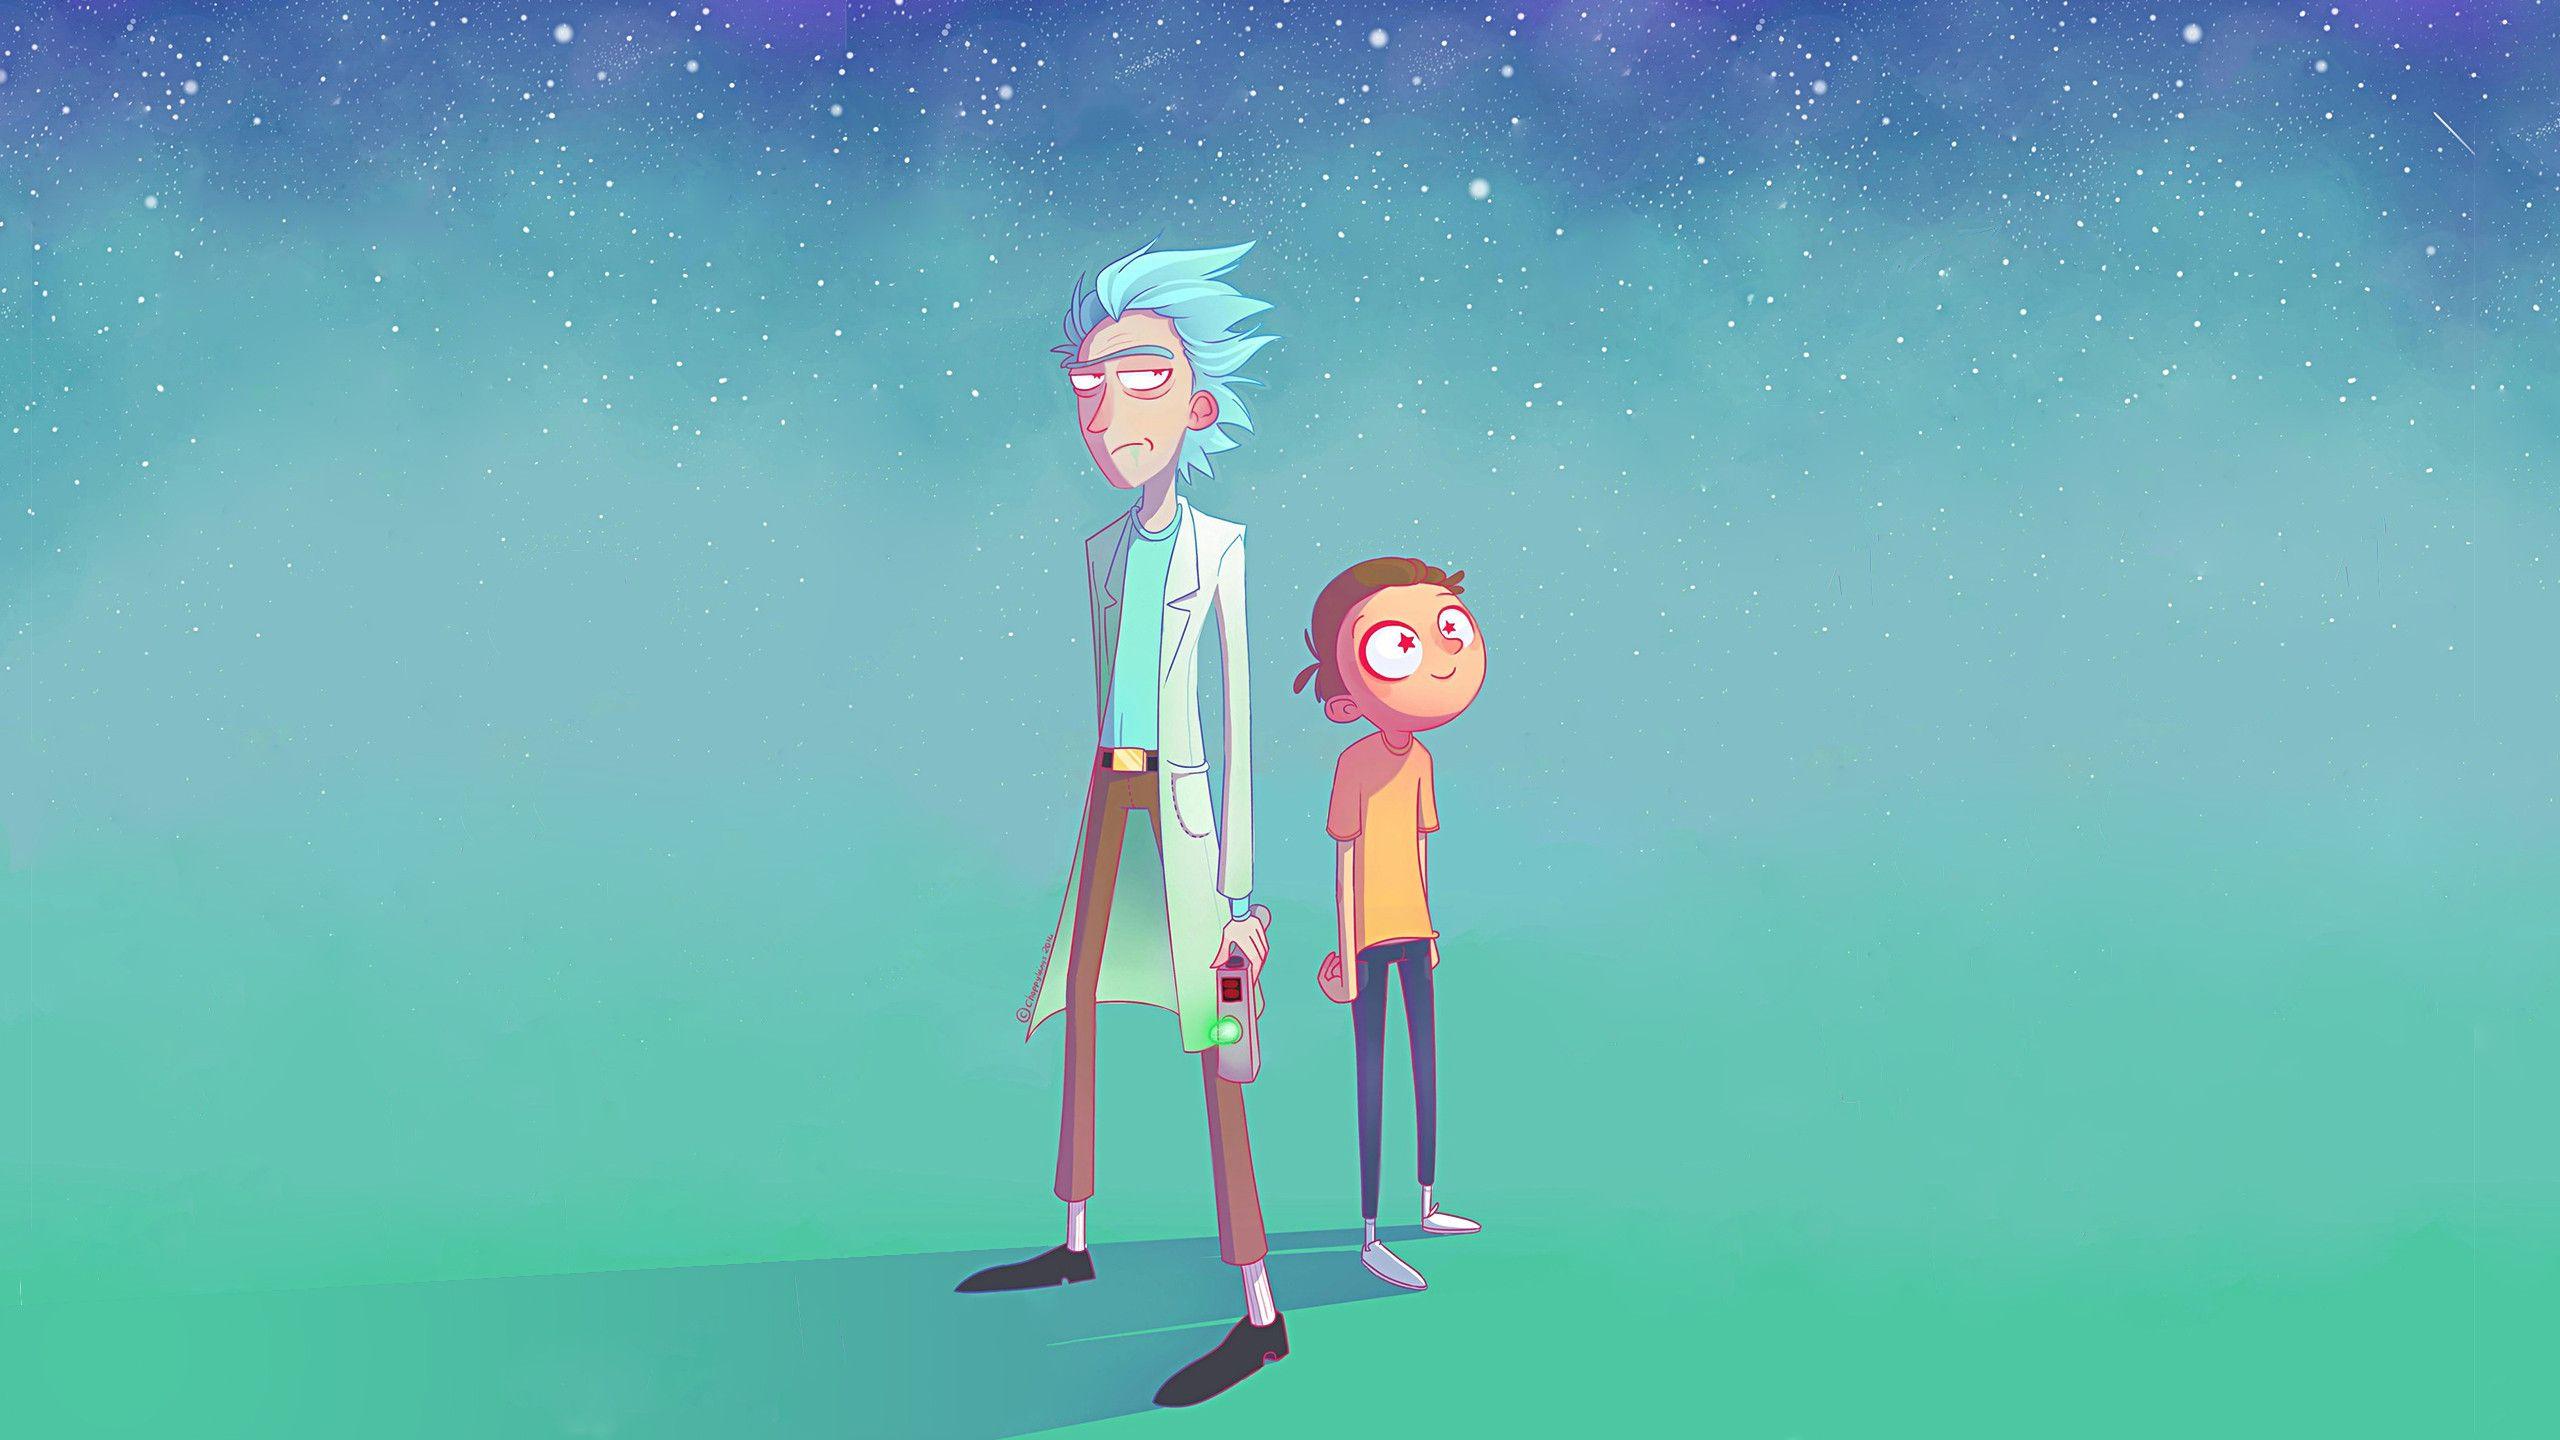 Rick and Morty by Choppywings [2560x1440] #wallpaper in 2019